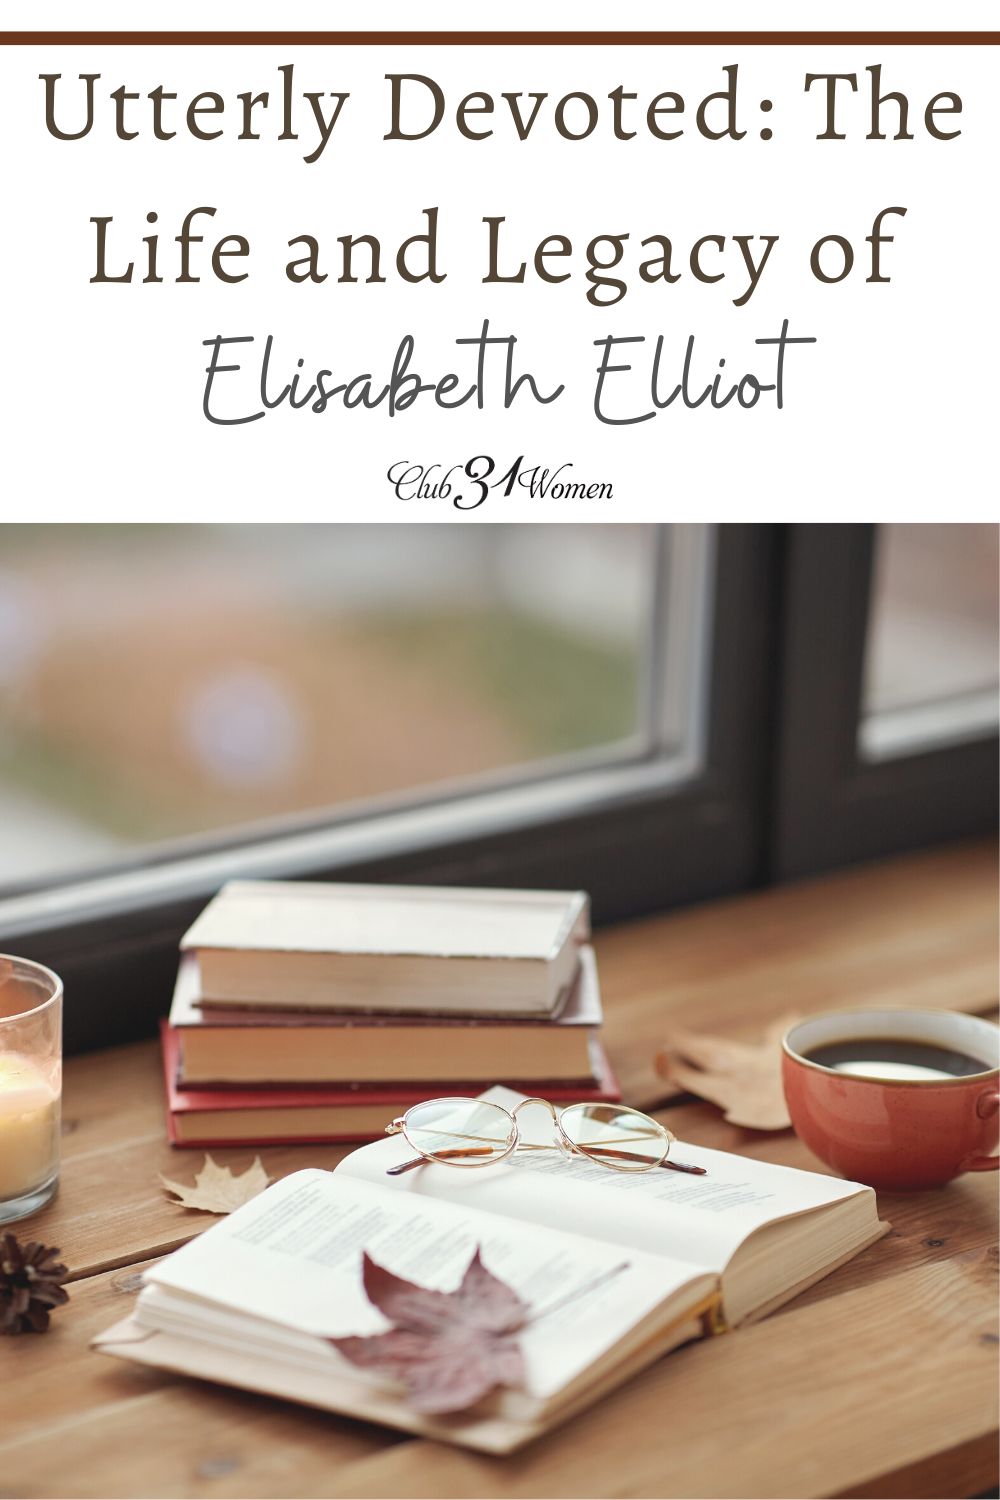 If you’re new to Elisabeth Elliot’s work – or if you’d like to pursue her life and legacy a little further – here are a few books I recommend. via @Club31Women